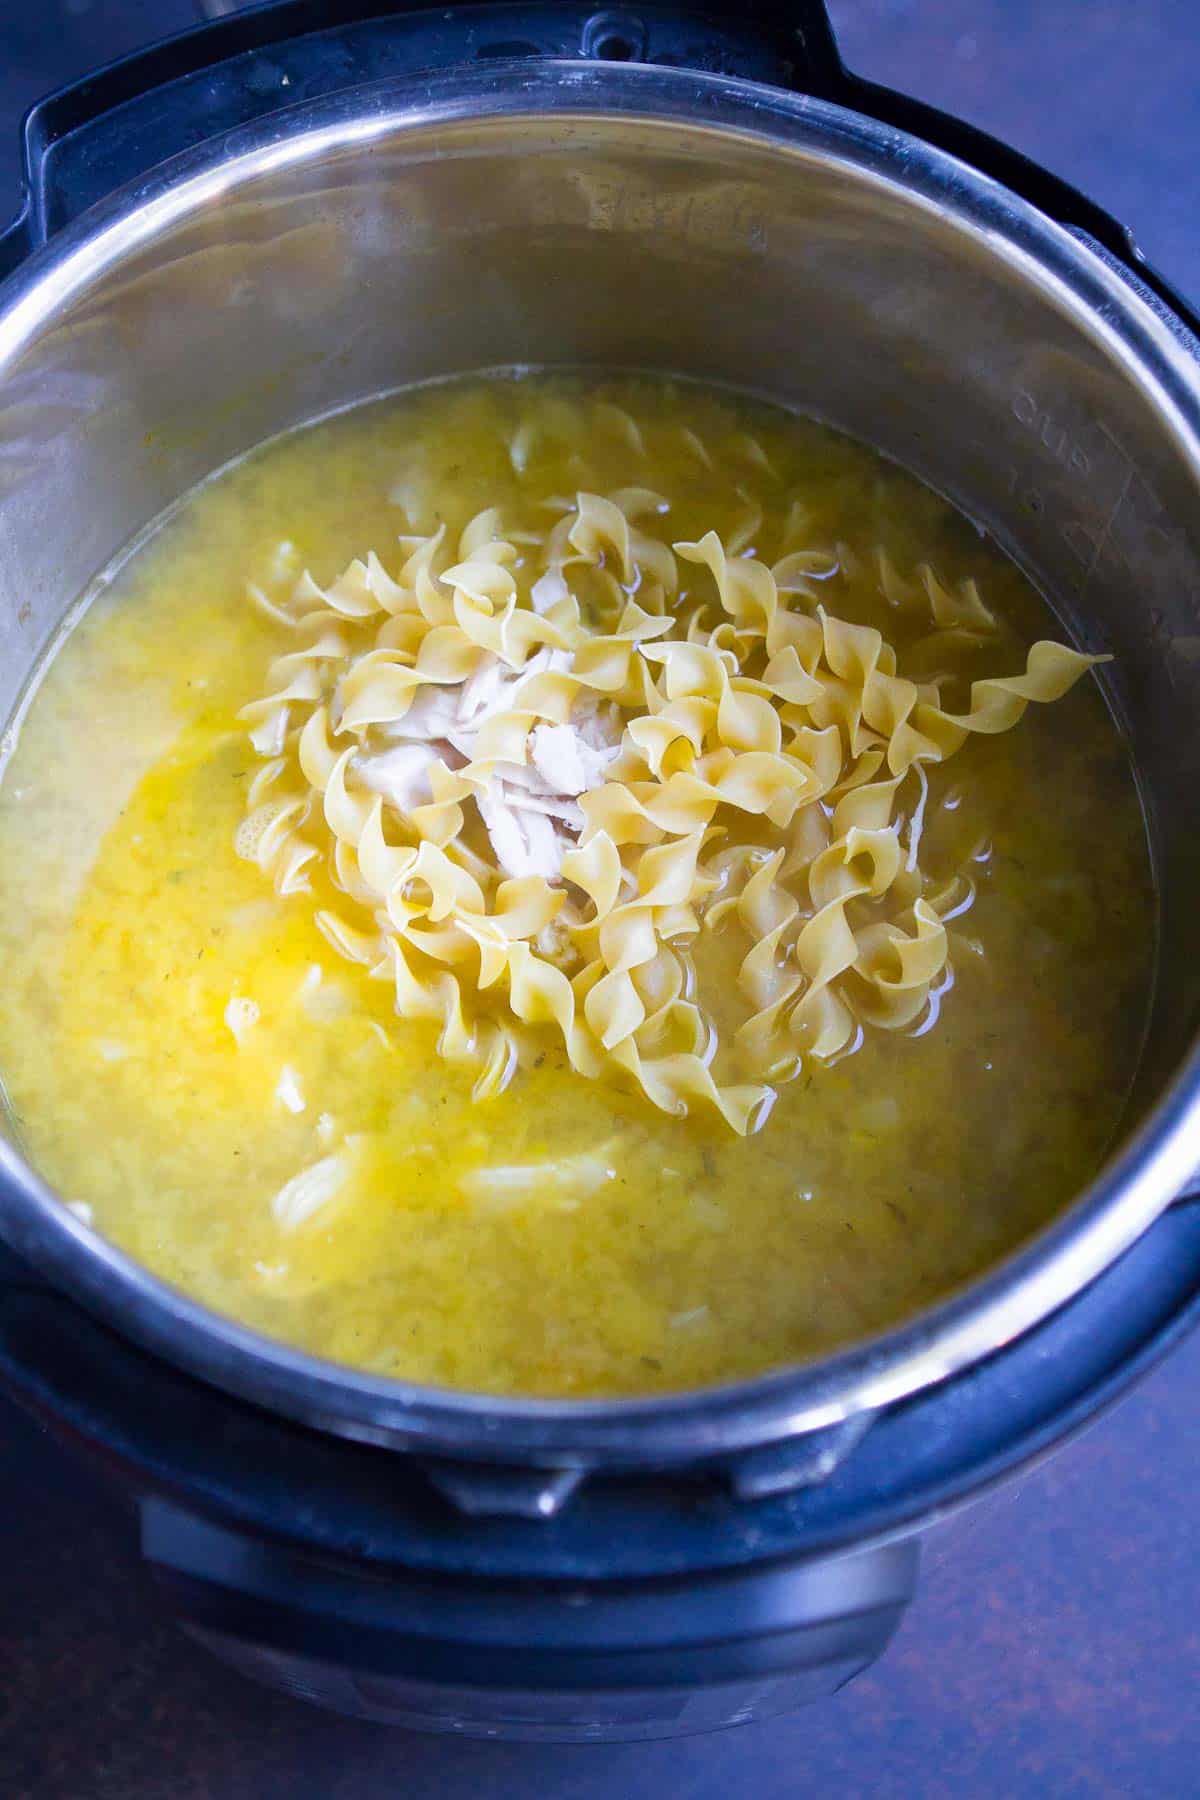 Broth and egg noodles in a pressure cooker.